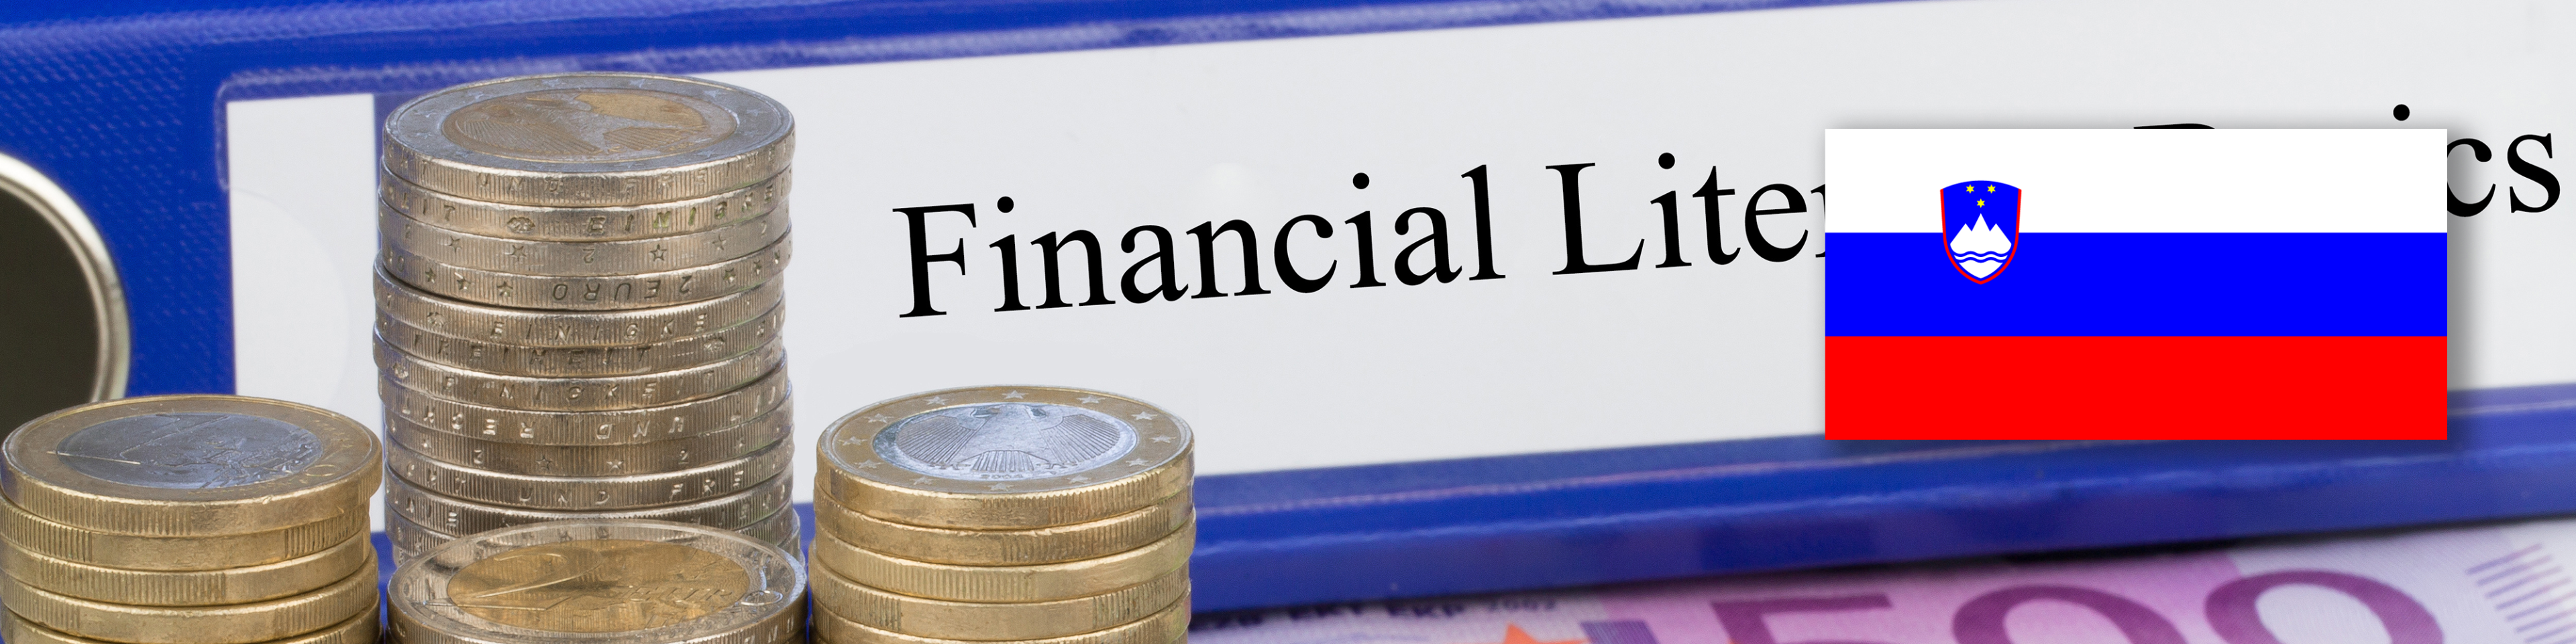 Banner image for the Financial literacy survey and educational tools project page